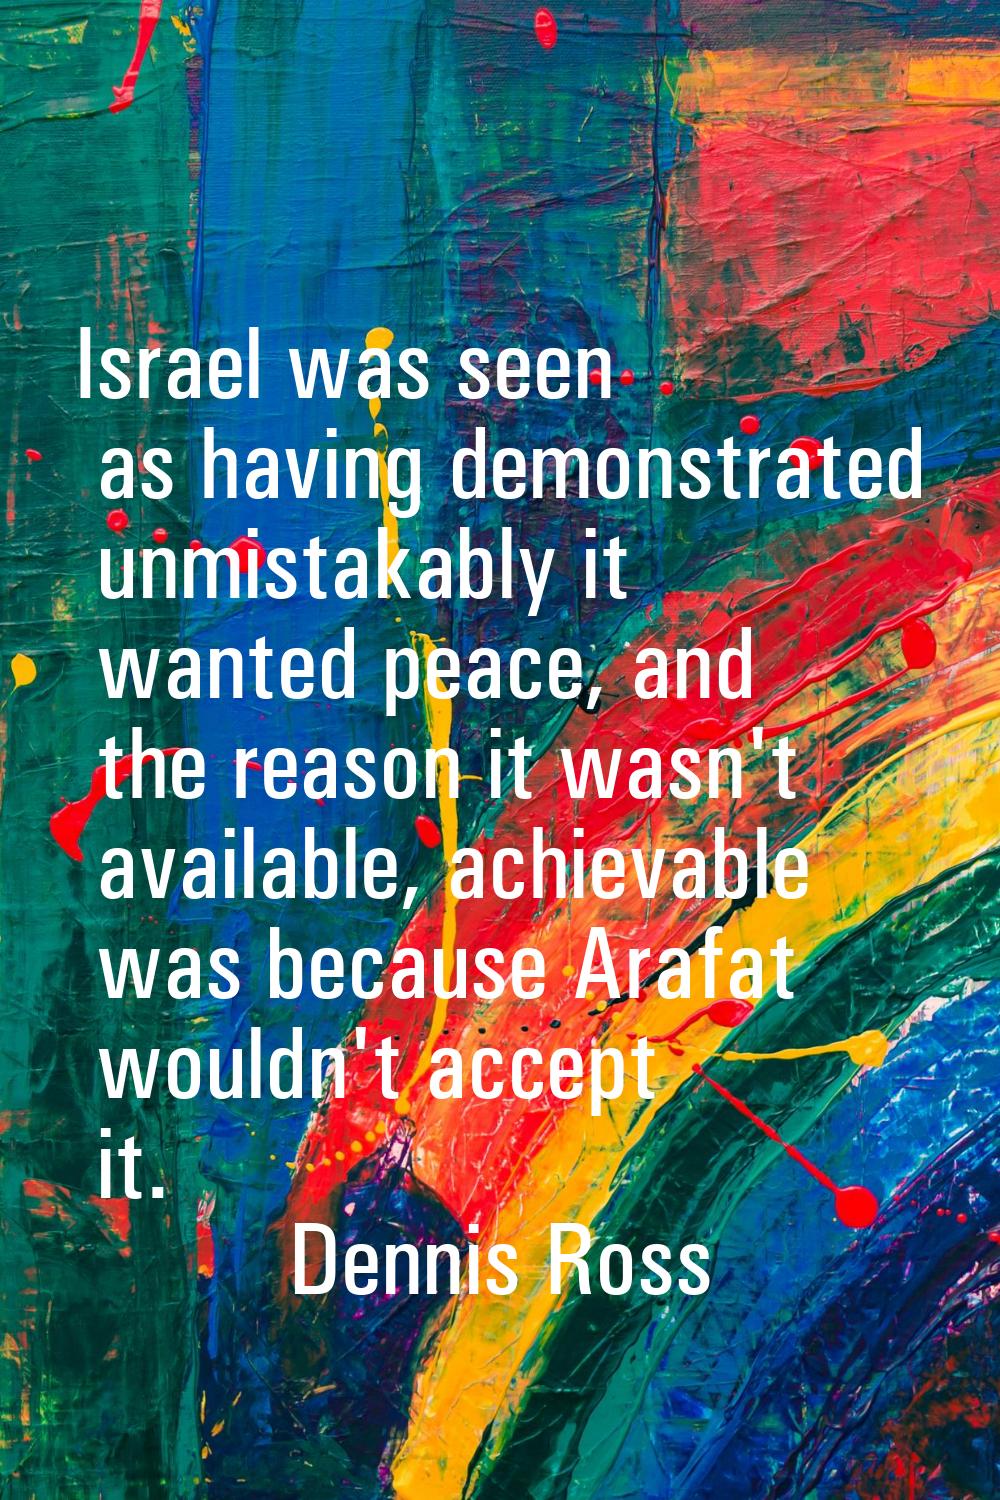 Israel was seen as having demonstrated unmistakably it wanted peace, and the reason it wasn't avail